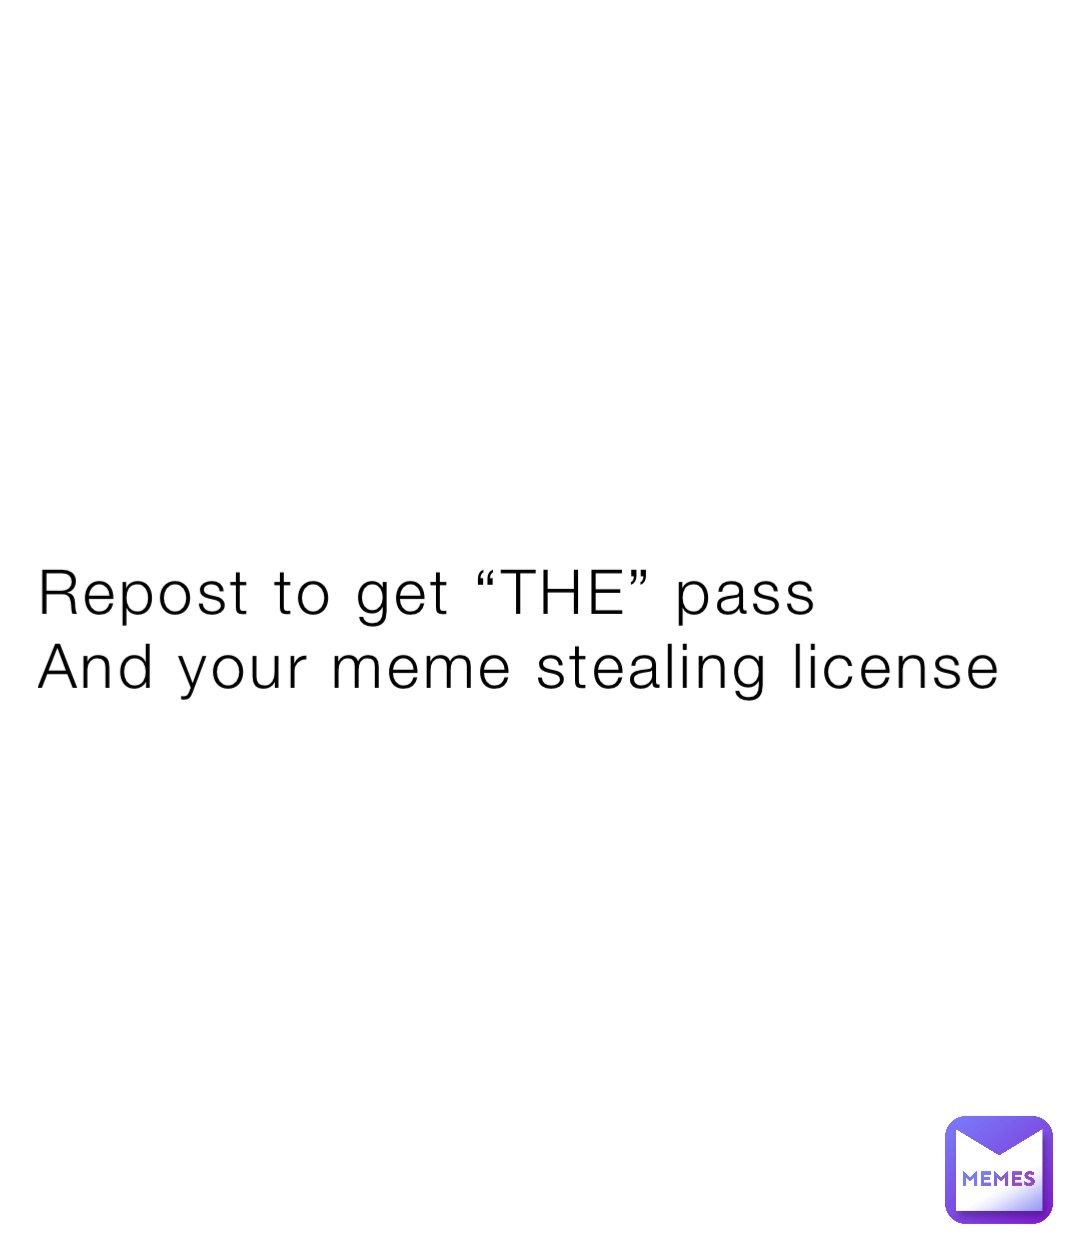 Repost to get “THE” pass
And your meme stealing license